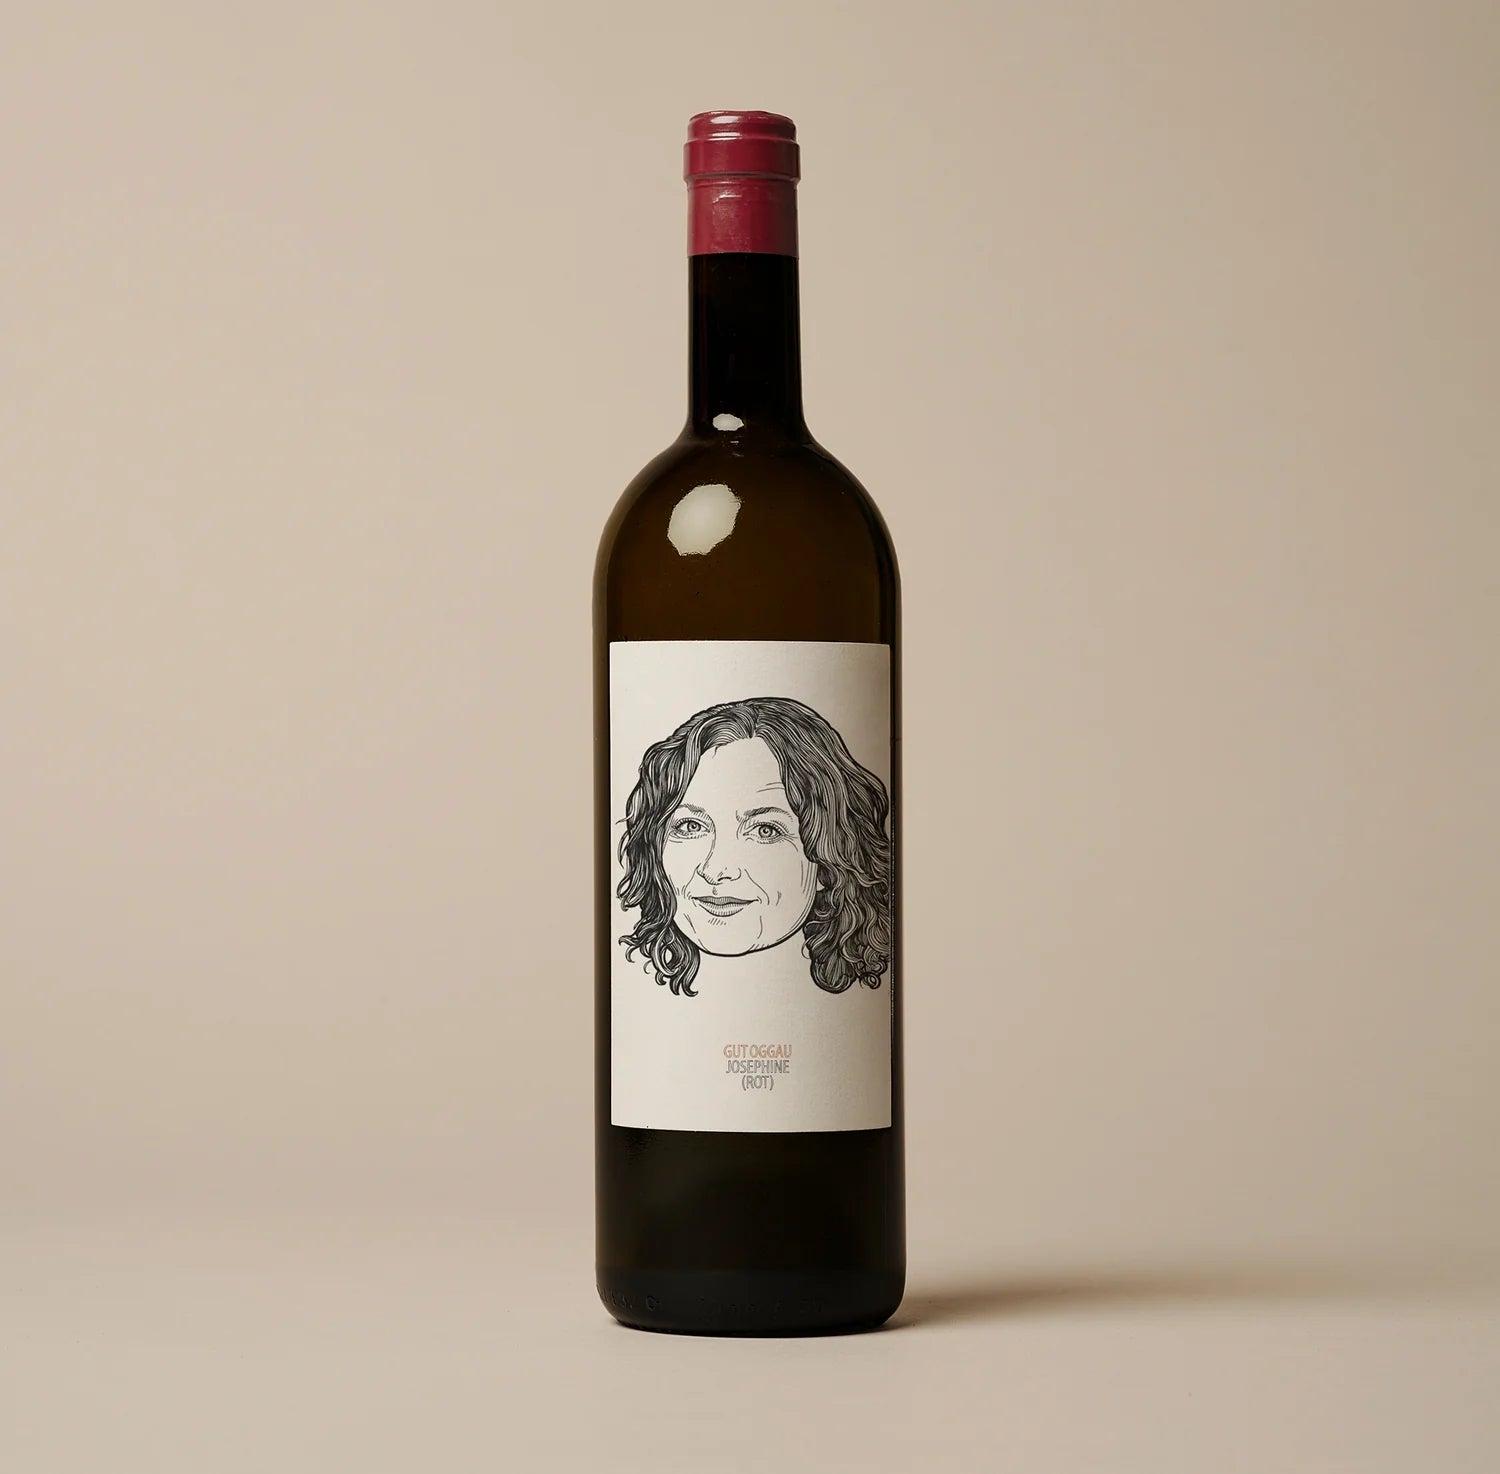 wine bottle with older woman face on label